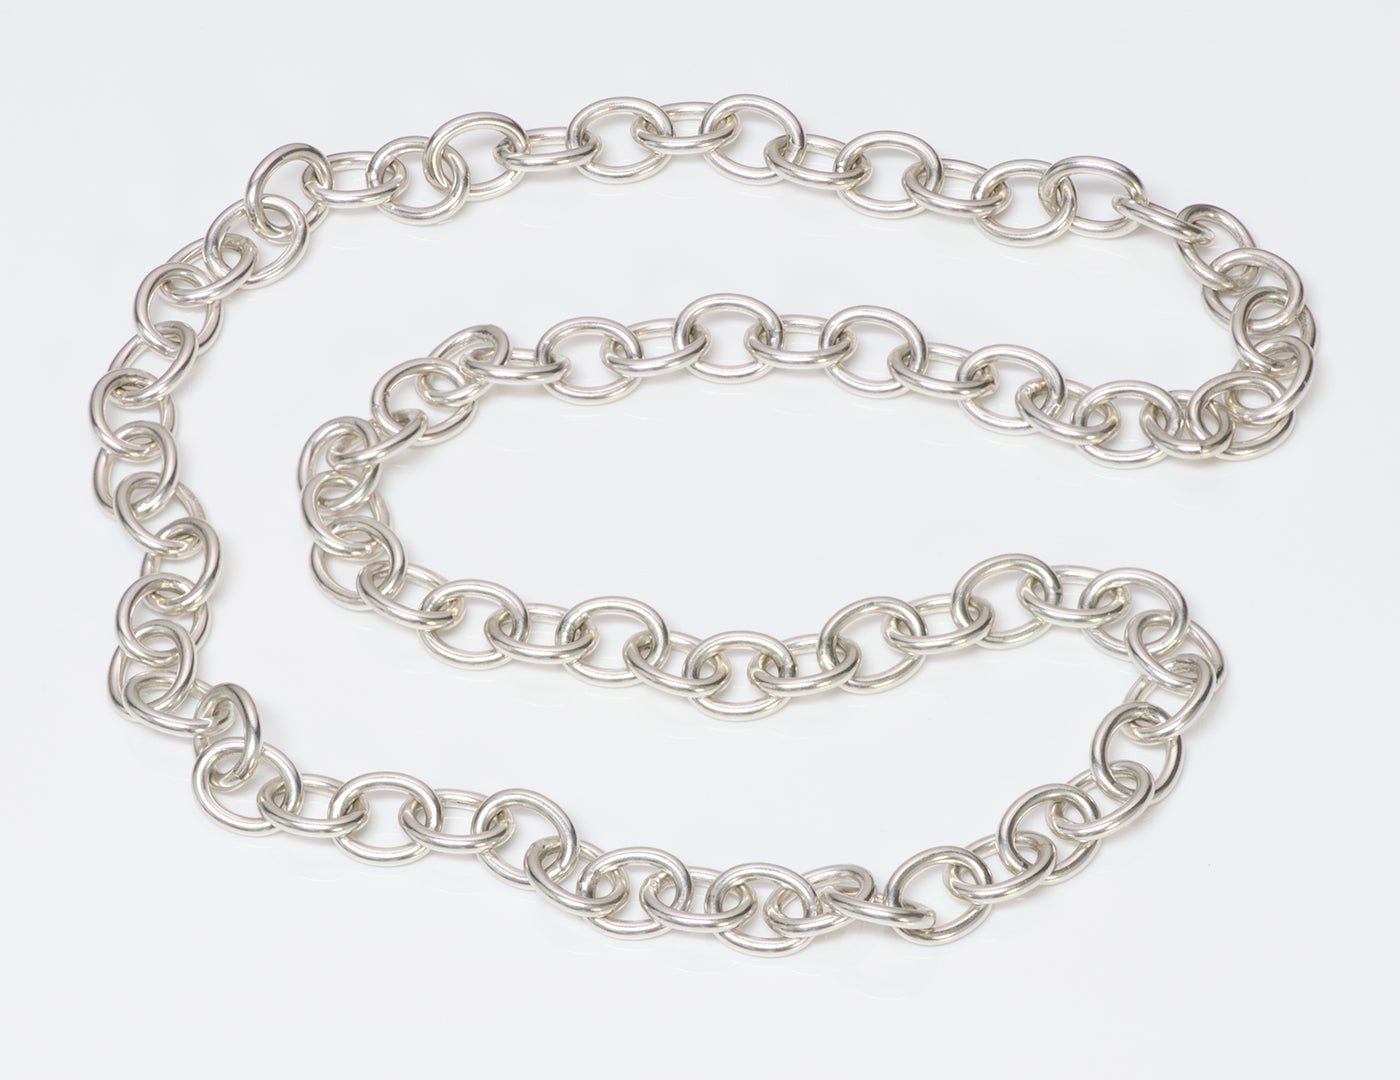 Tiffany & Co. Sterling Silver Chain Necklace